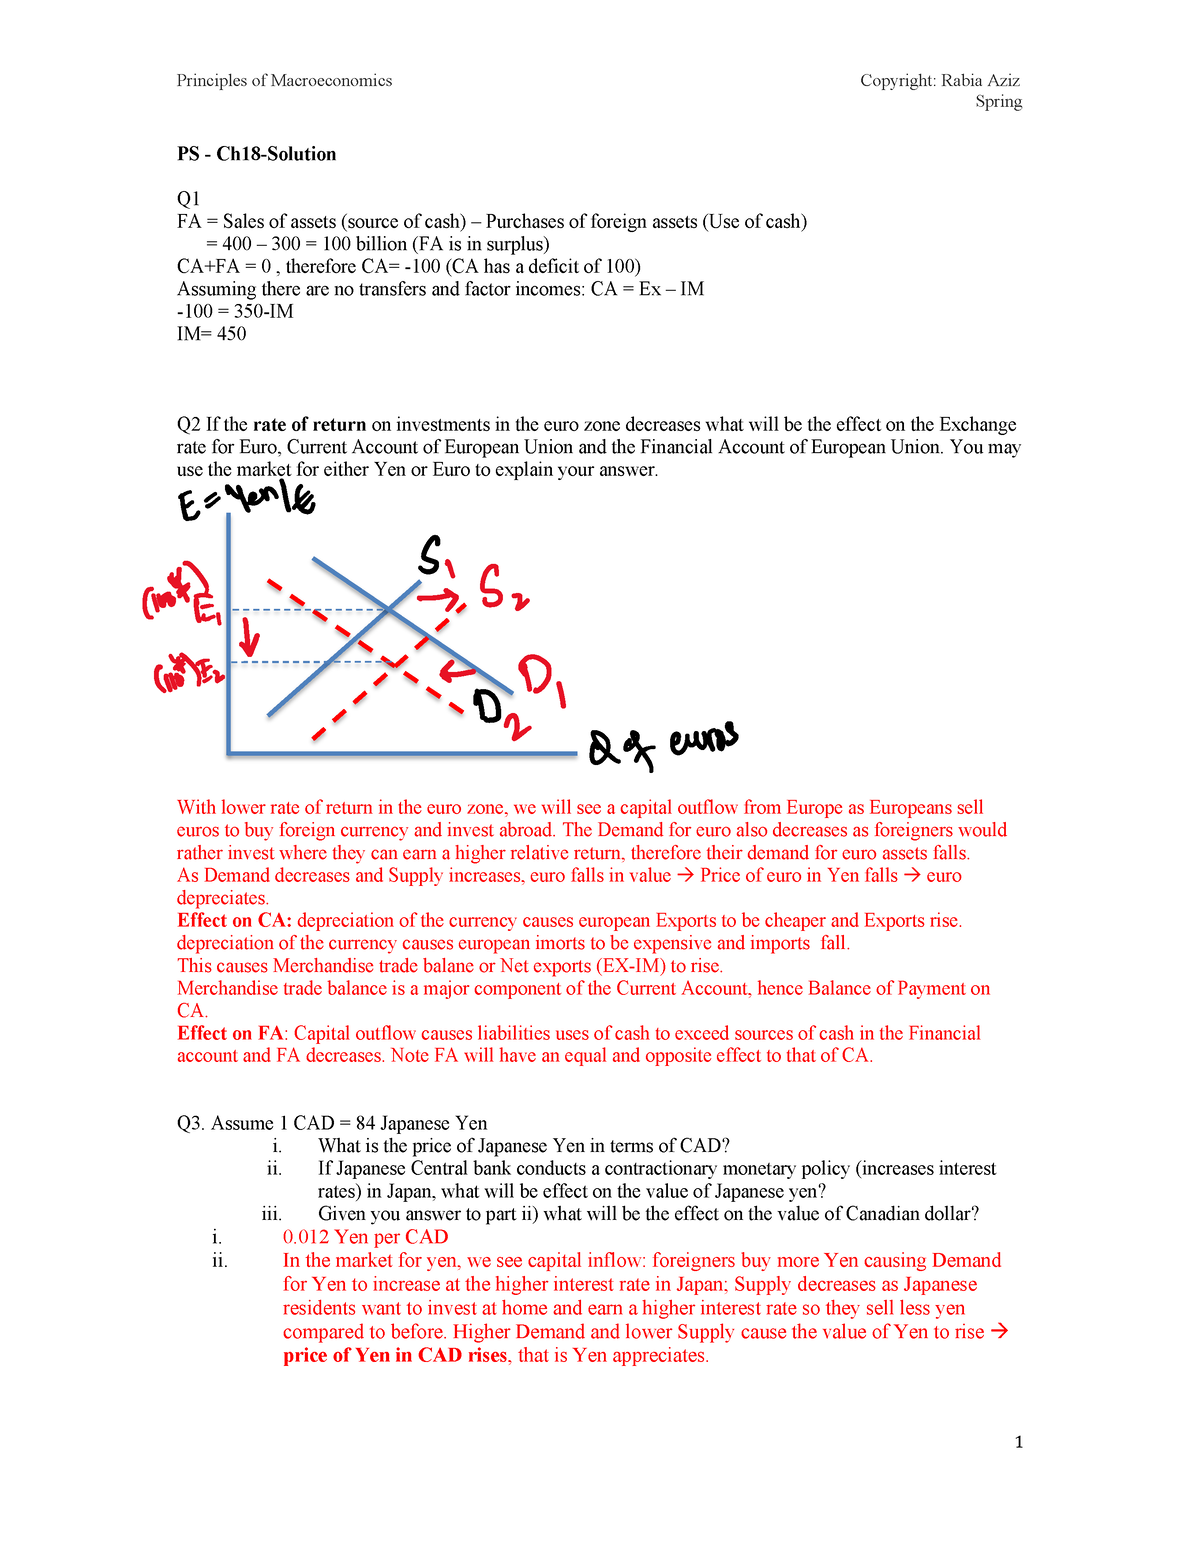 Ps Ch18 Solution Chapter 18 Practice Assignment With Questions And Answers Principles Of 5595